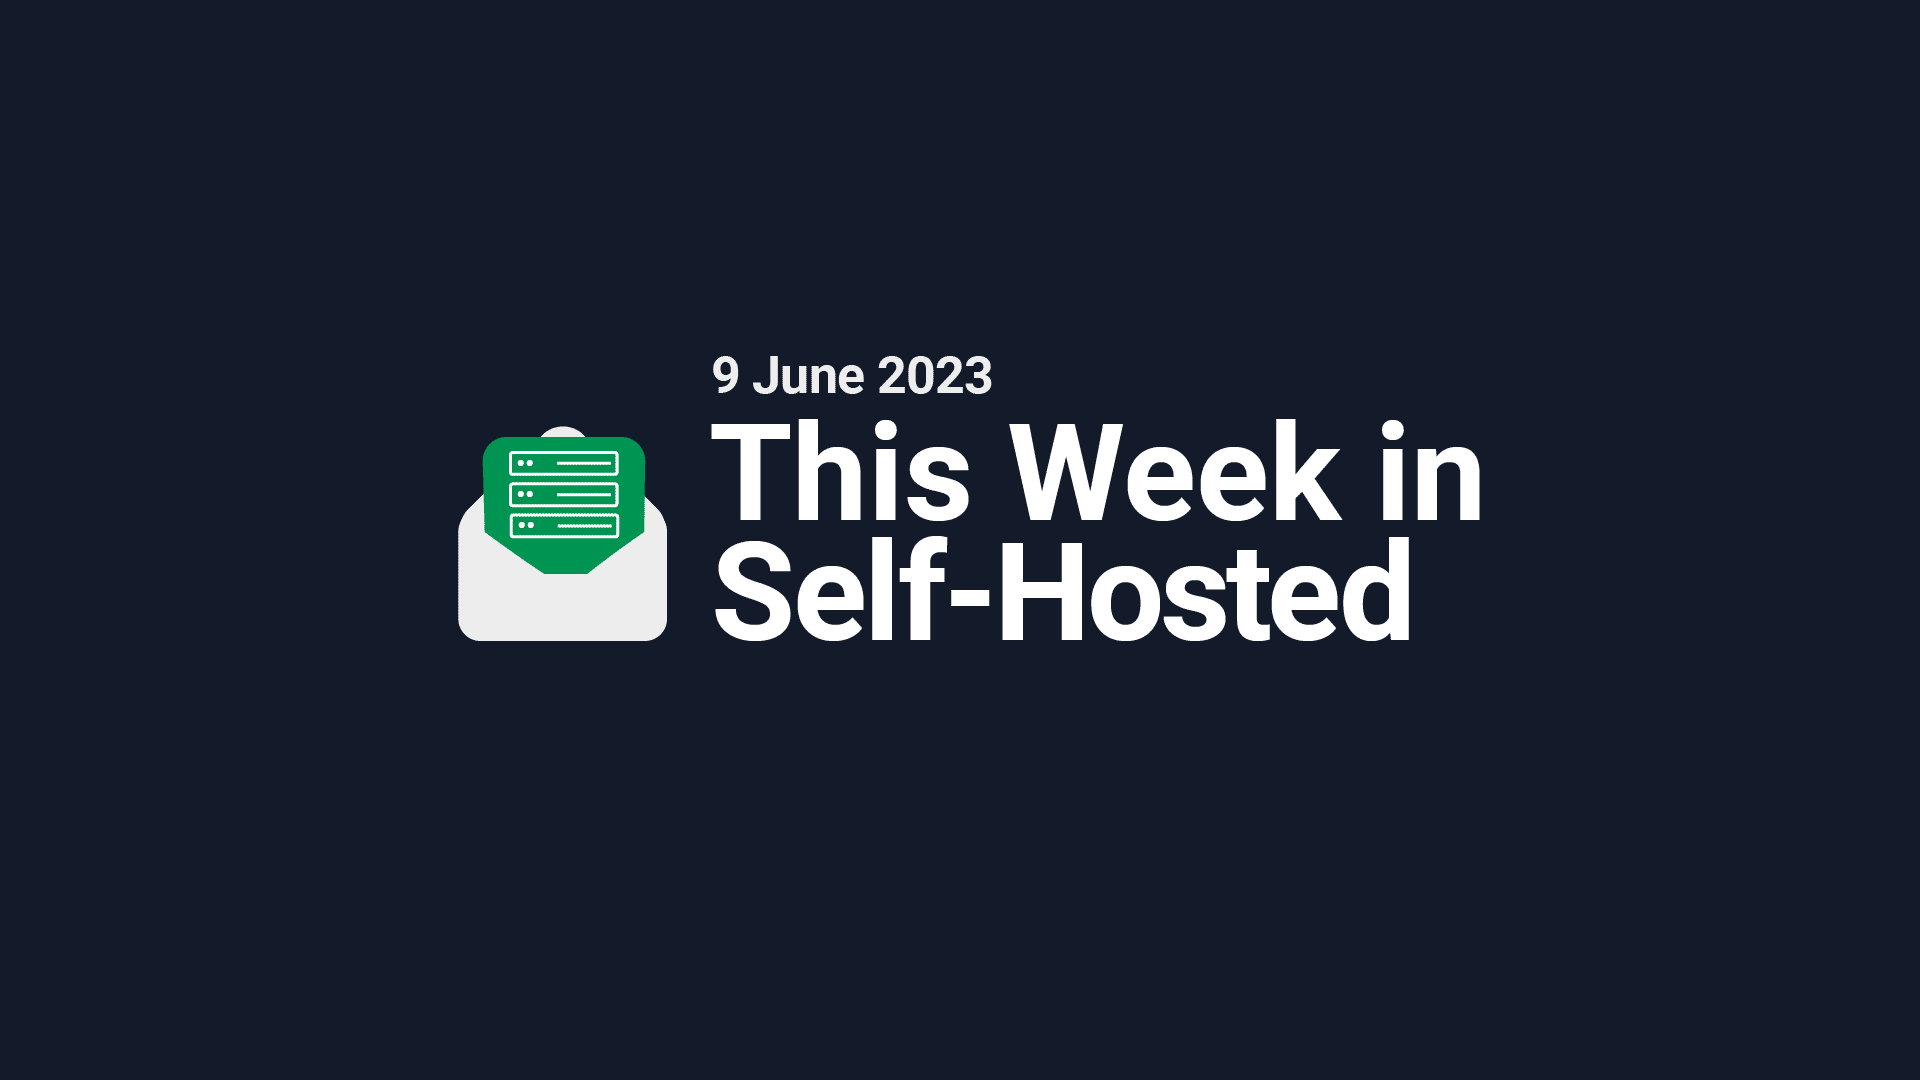 This Week in Self-Hosted (9 June 2023) Post image